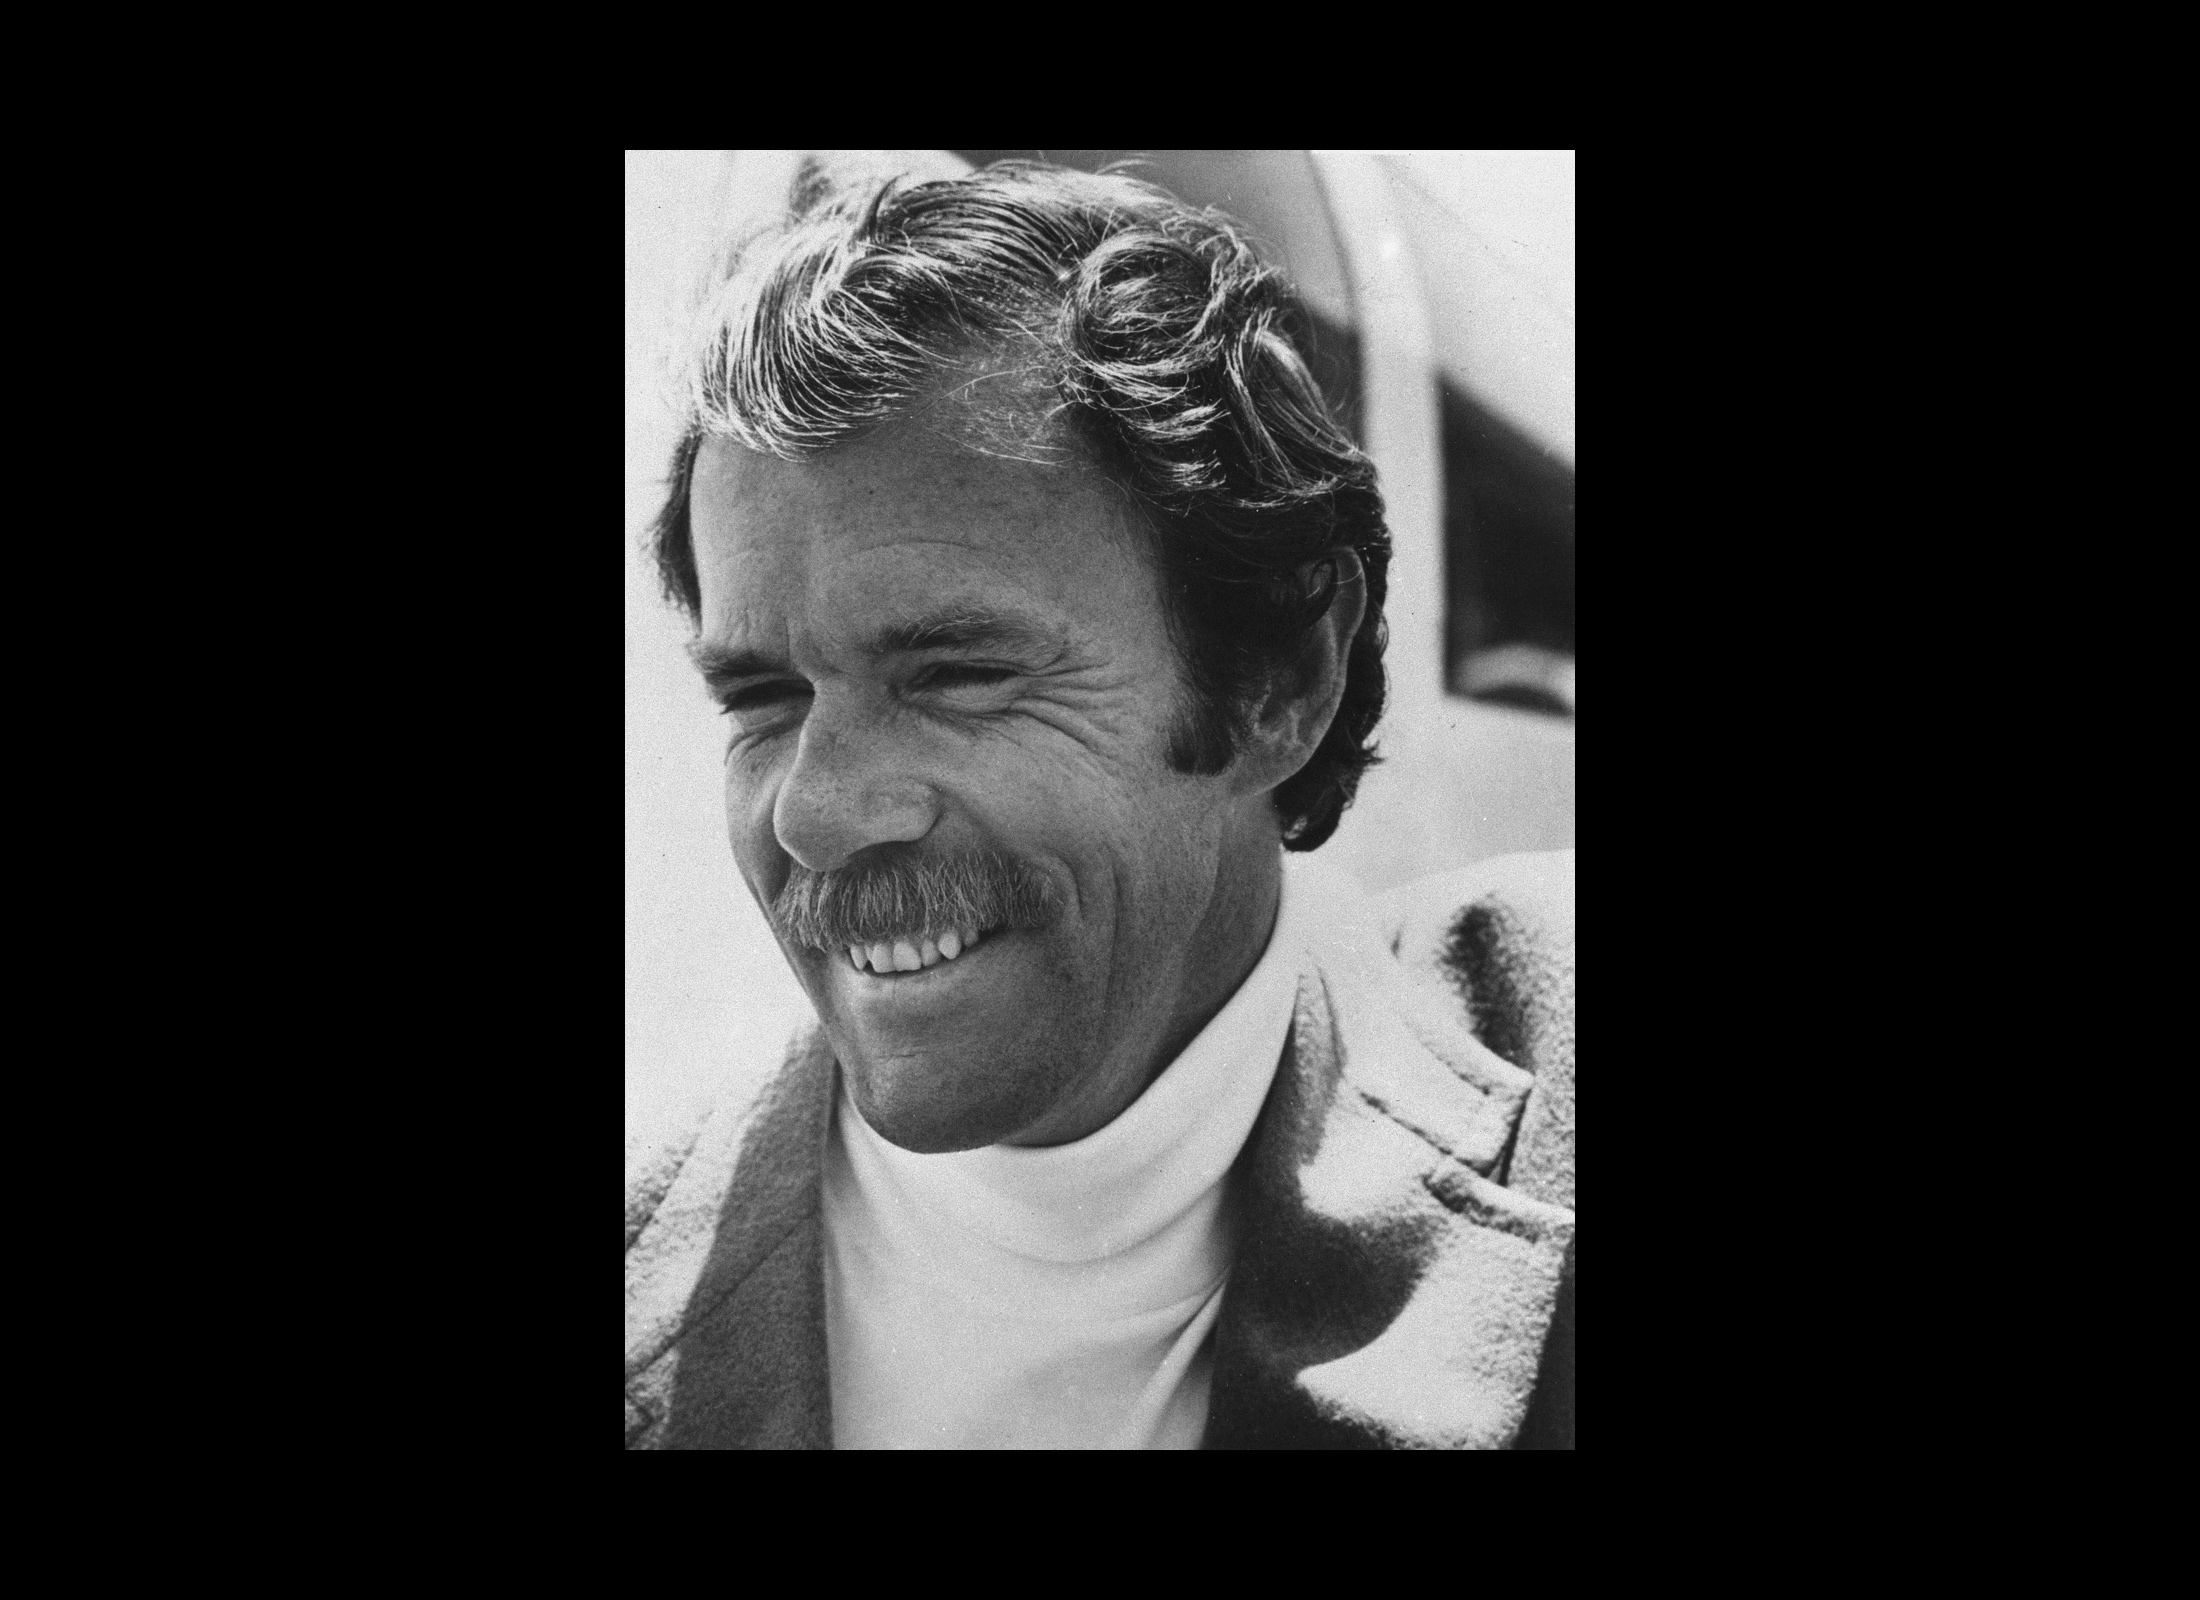 Richard Bach
Author, shown in 1975, sustained head and shoulder injuries in accident